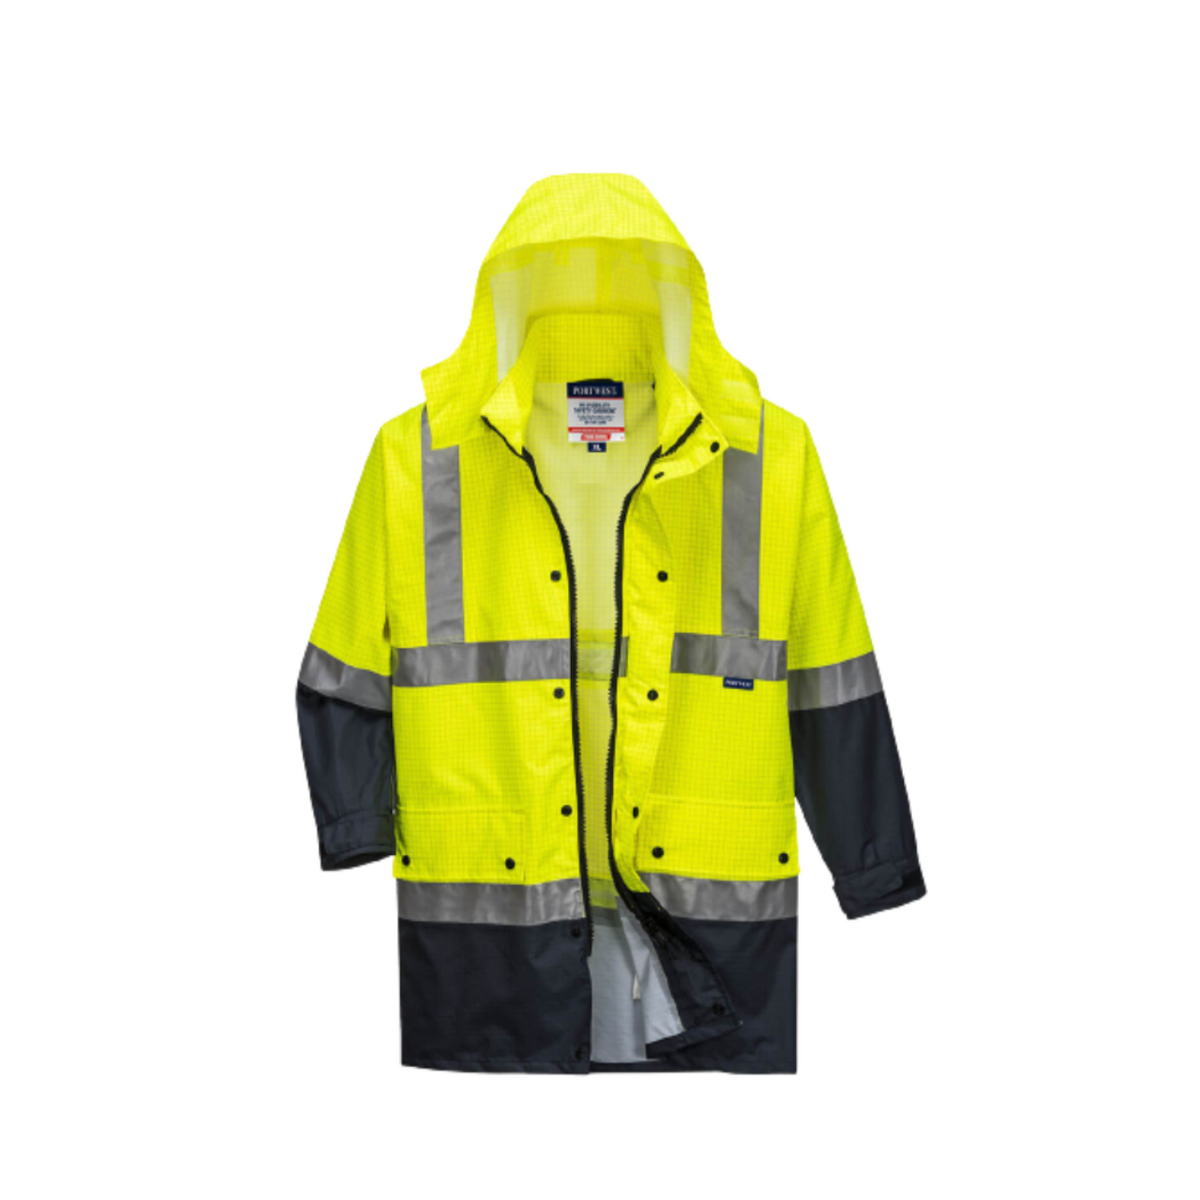 Portwest Mackay Anti-Static Jacket Waterproof Hood Reflective Work Safety MJ370-Collins Clothing Co